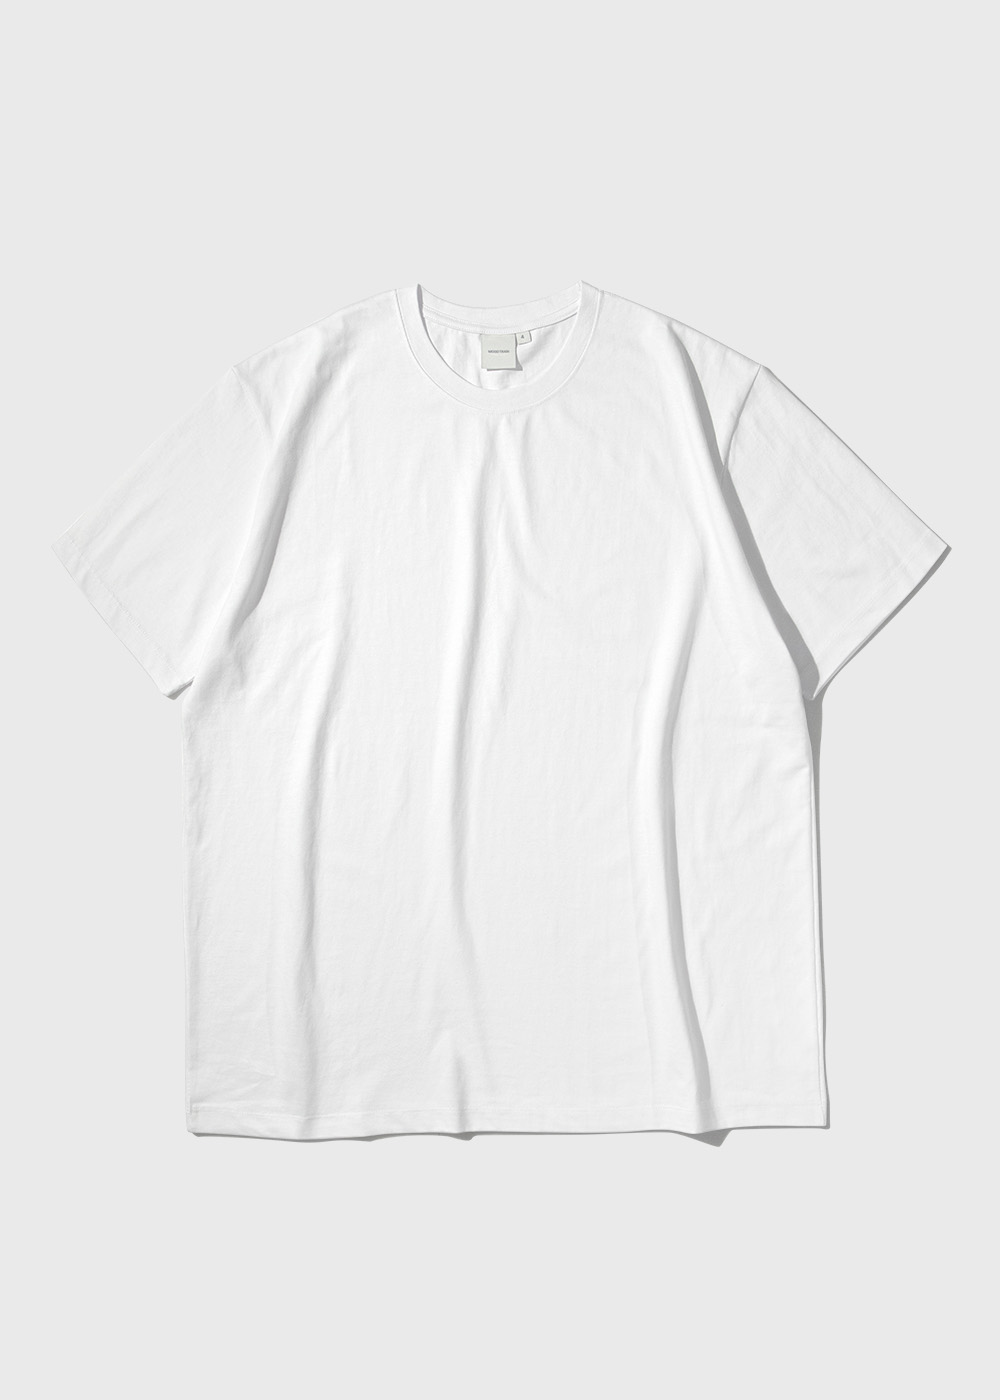 G. Heavy Enzymed Combed Cotton-Polyester Blended 12/1 Single T-shirt _ white